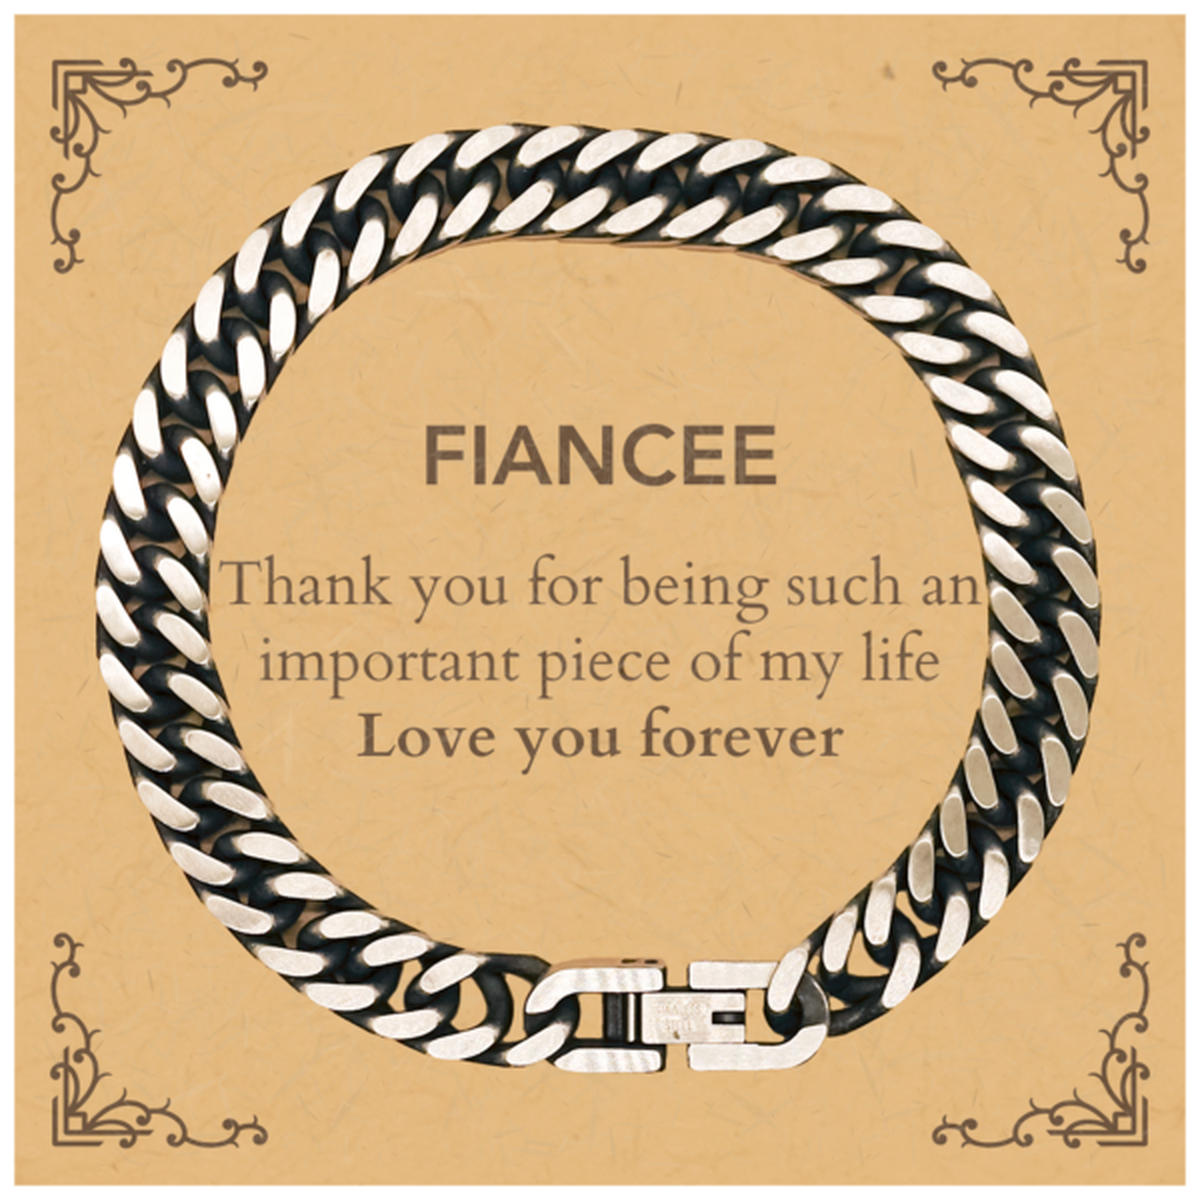 Appropriate Fiancee Cuban Link Chain Bracelet Epic Birthday Gifts for Fiancee Thank you for being such an important piece of my life Fiancee Christmas Mothers Fathers Day